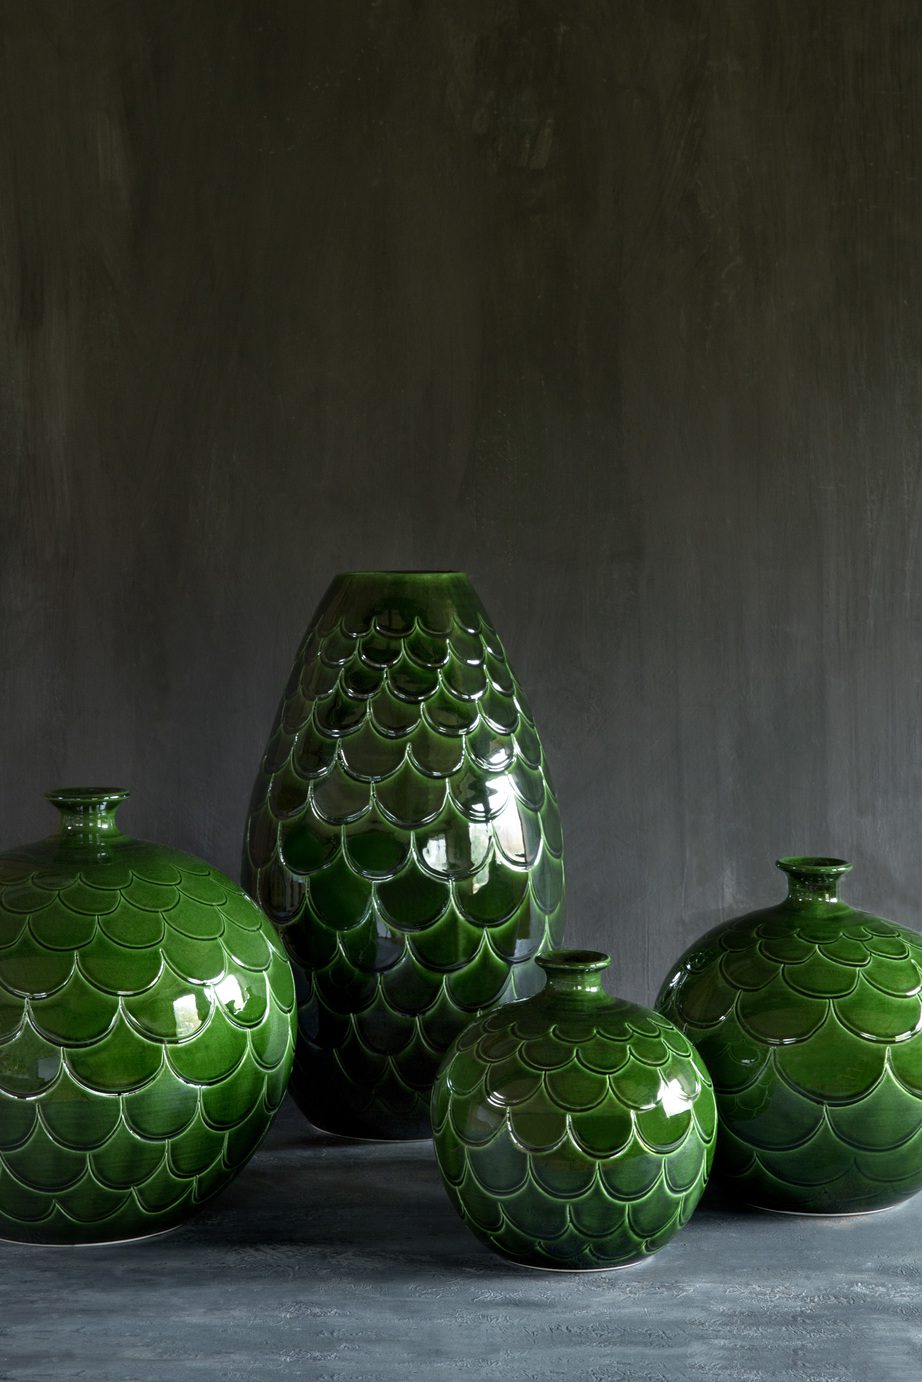 Collection of round- and cone-shaped vases glazed with emerald green.